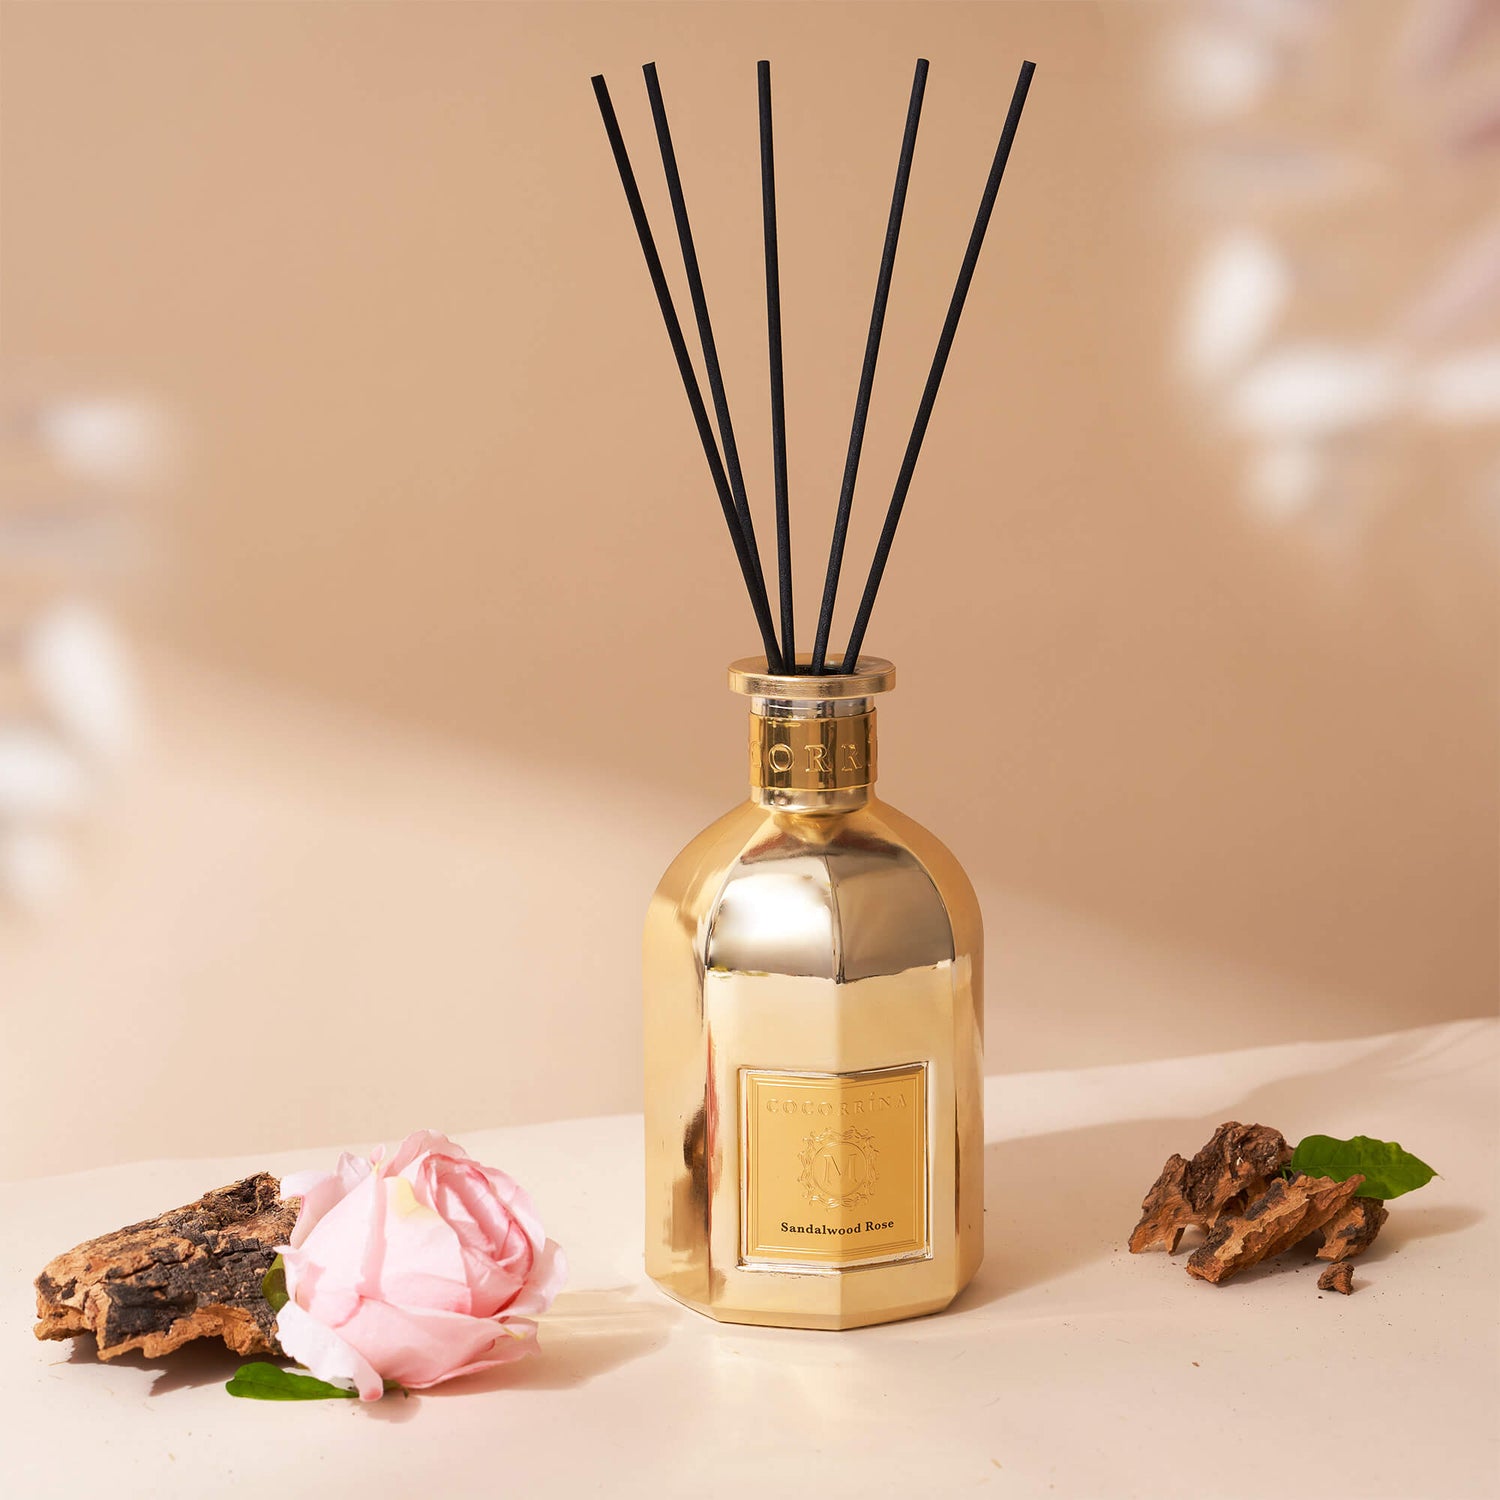 Are Reed Diffusers Safe for Cats?